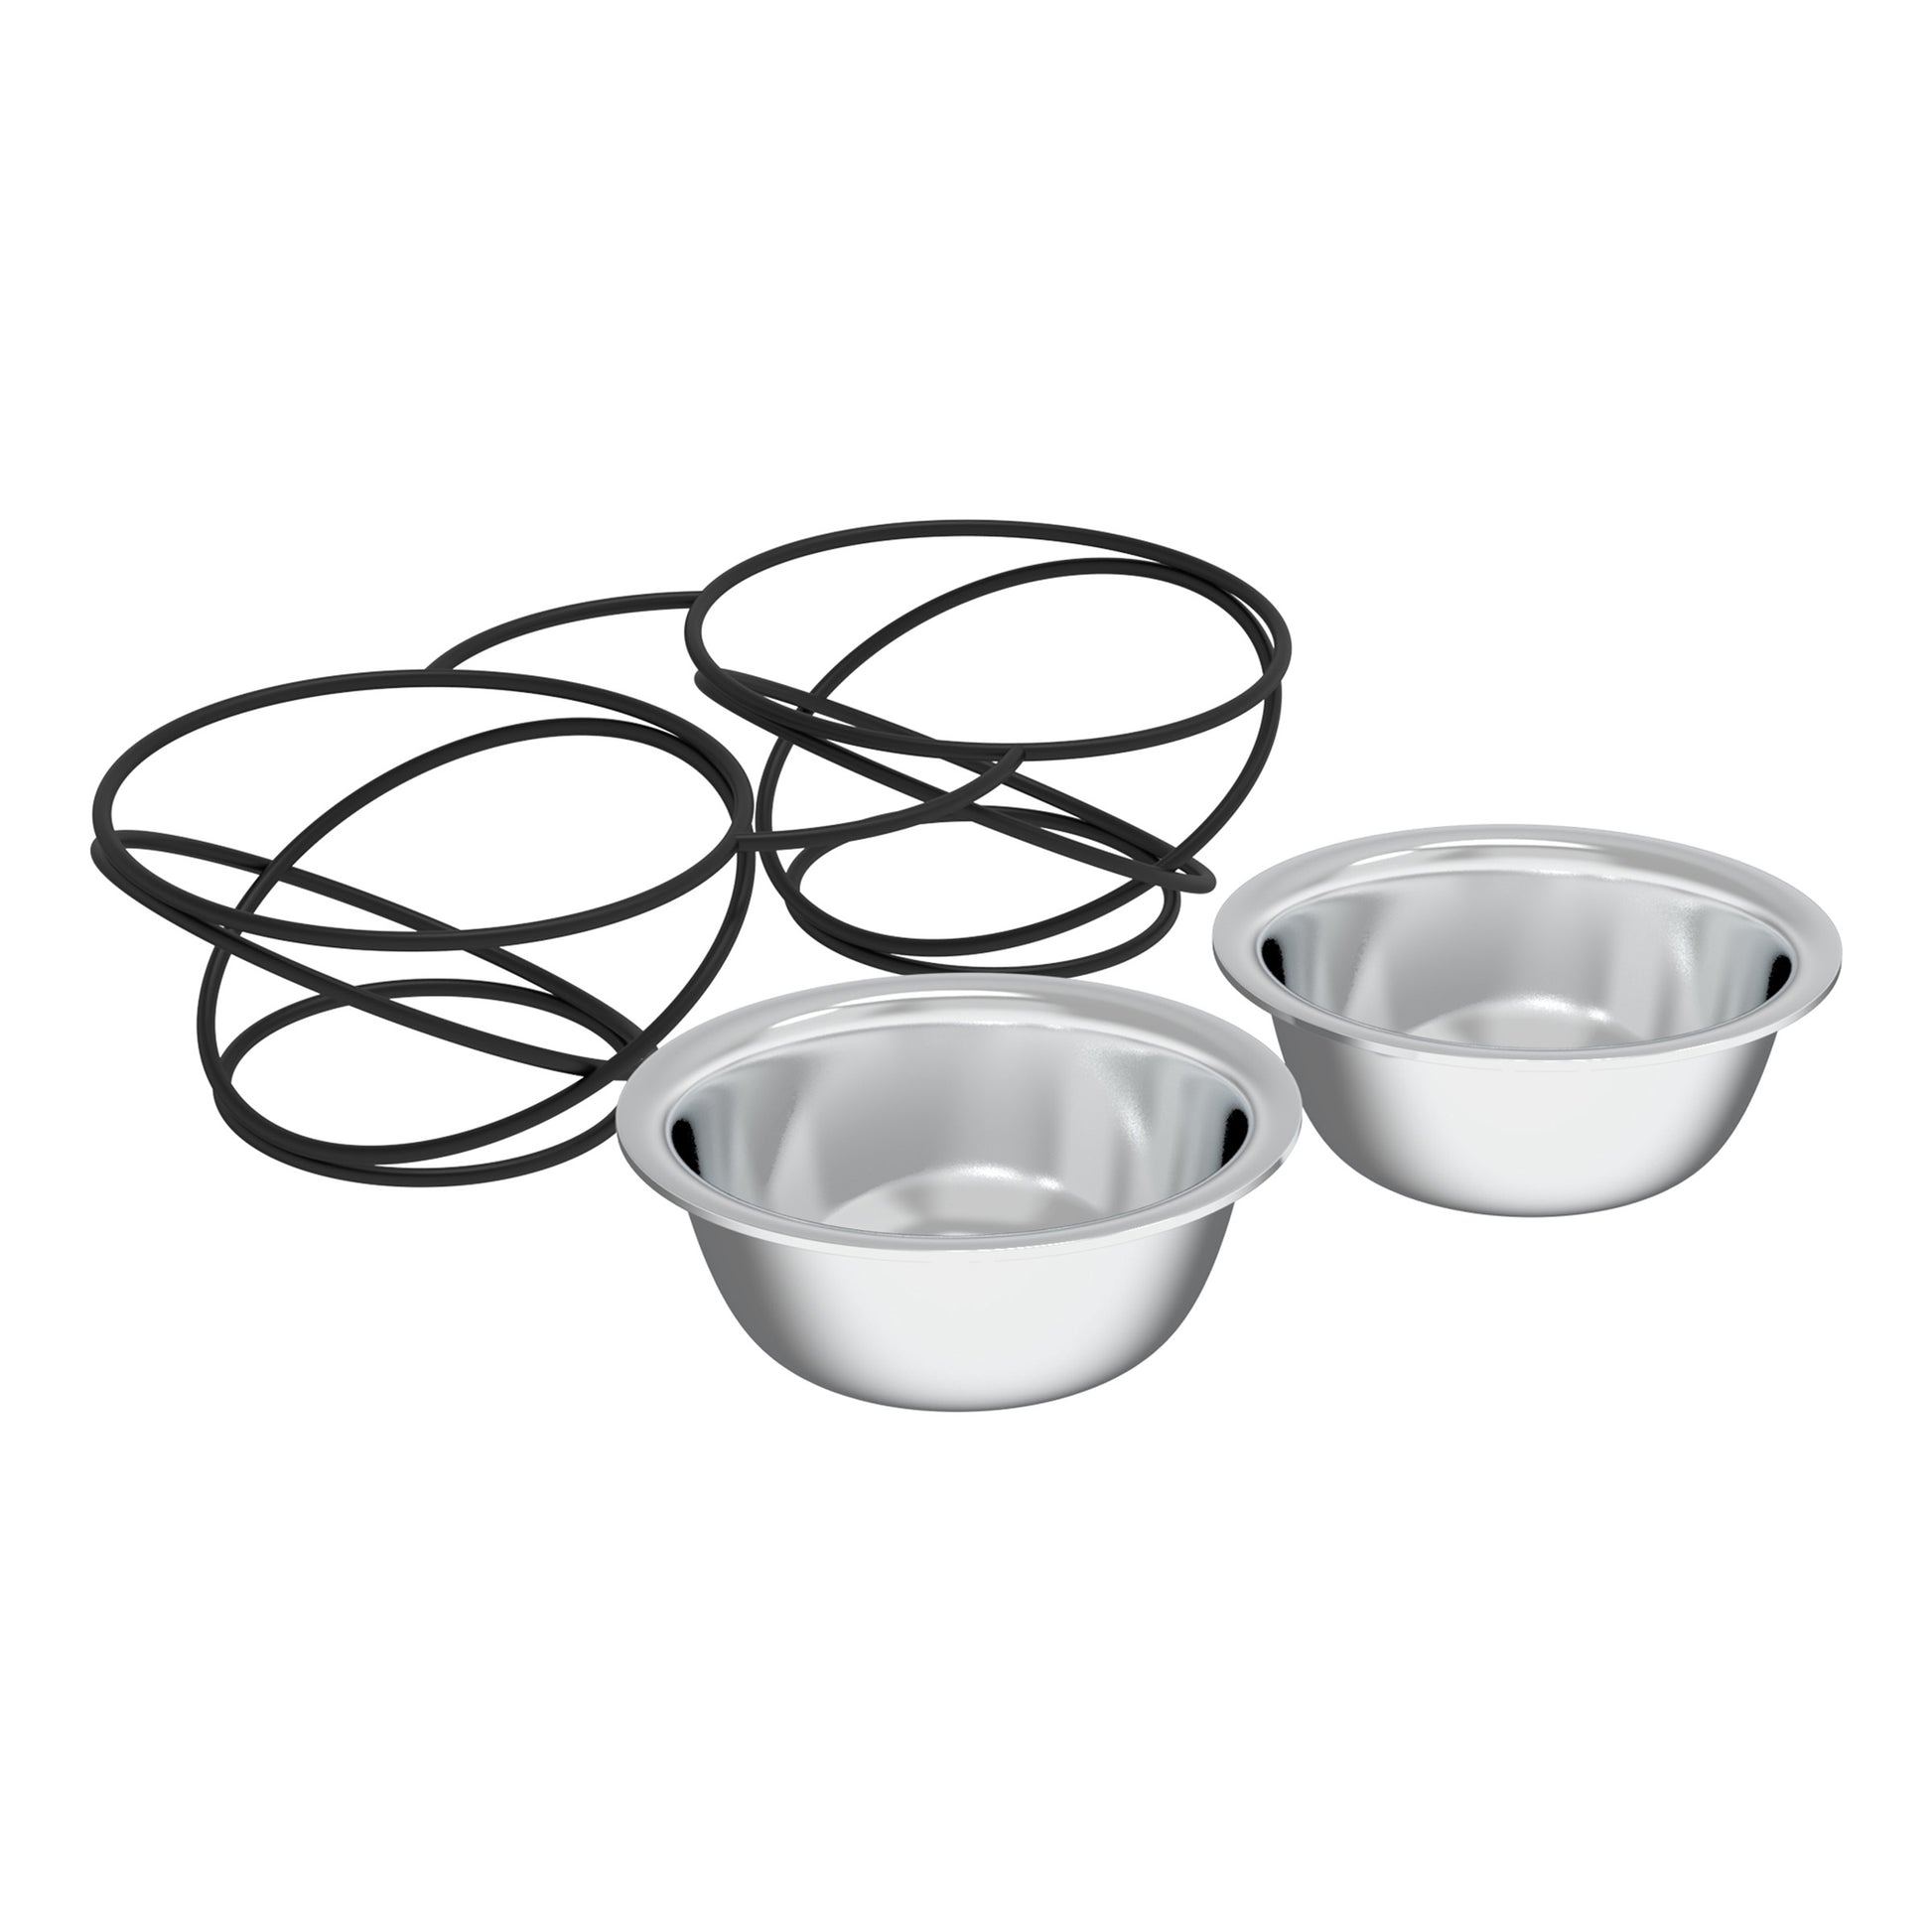 Elevated Dog Bowls Dog Food Bowls for Large Dogs w/ 2 Stainless Steel Bowls